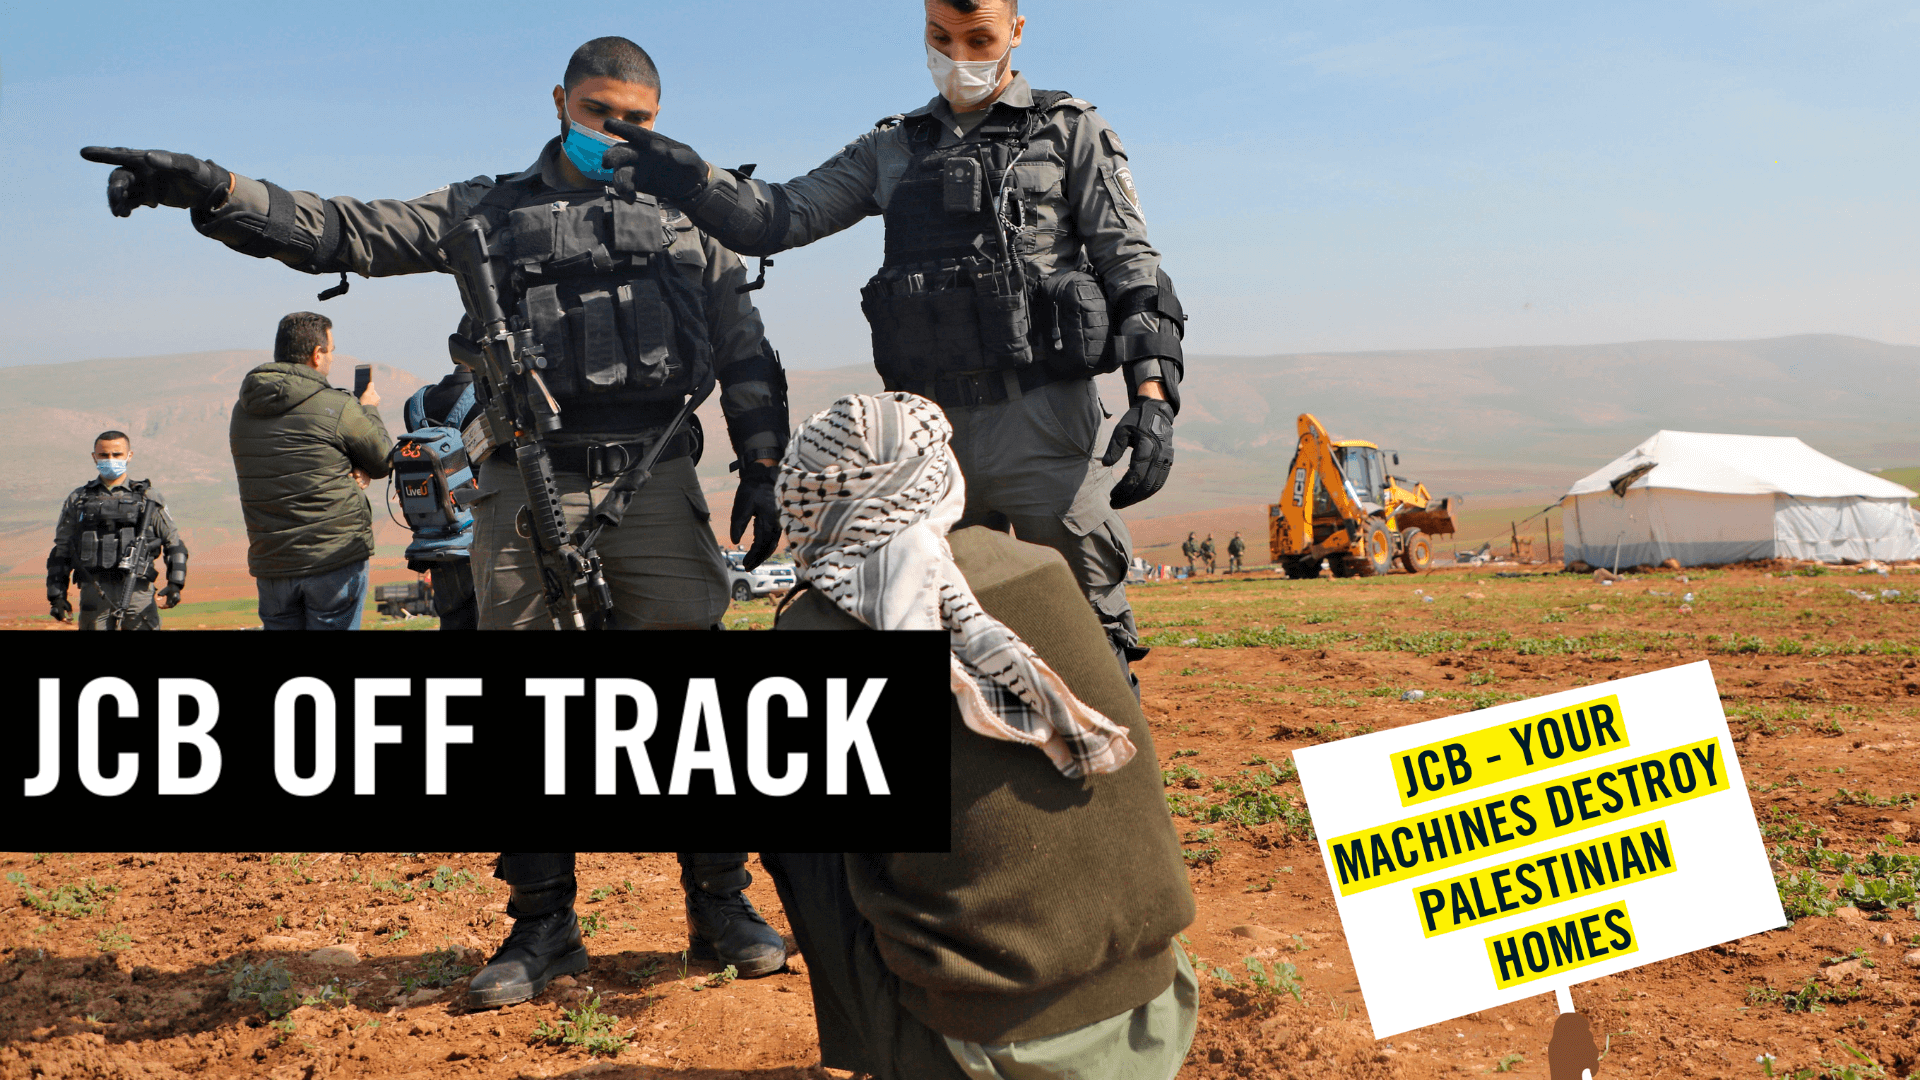 "Members of Israeli security forces talk to a man as soldiers demolish Bedouin tents and structures in the Humsa area east of the Palestinian village of Tubas, in the occupied West Bank, on February 8, 2021. On the bottom of the image there is an illustration of a placard that reads JCB: your machines destroy Palestinian homes."